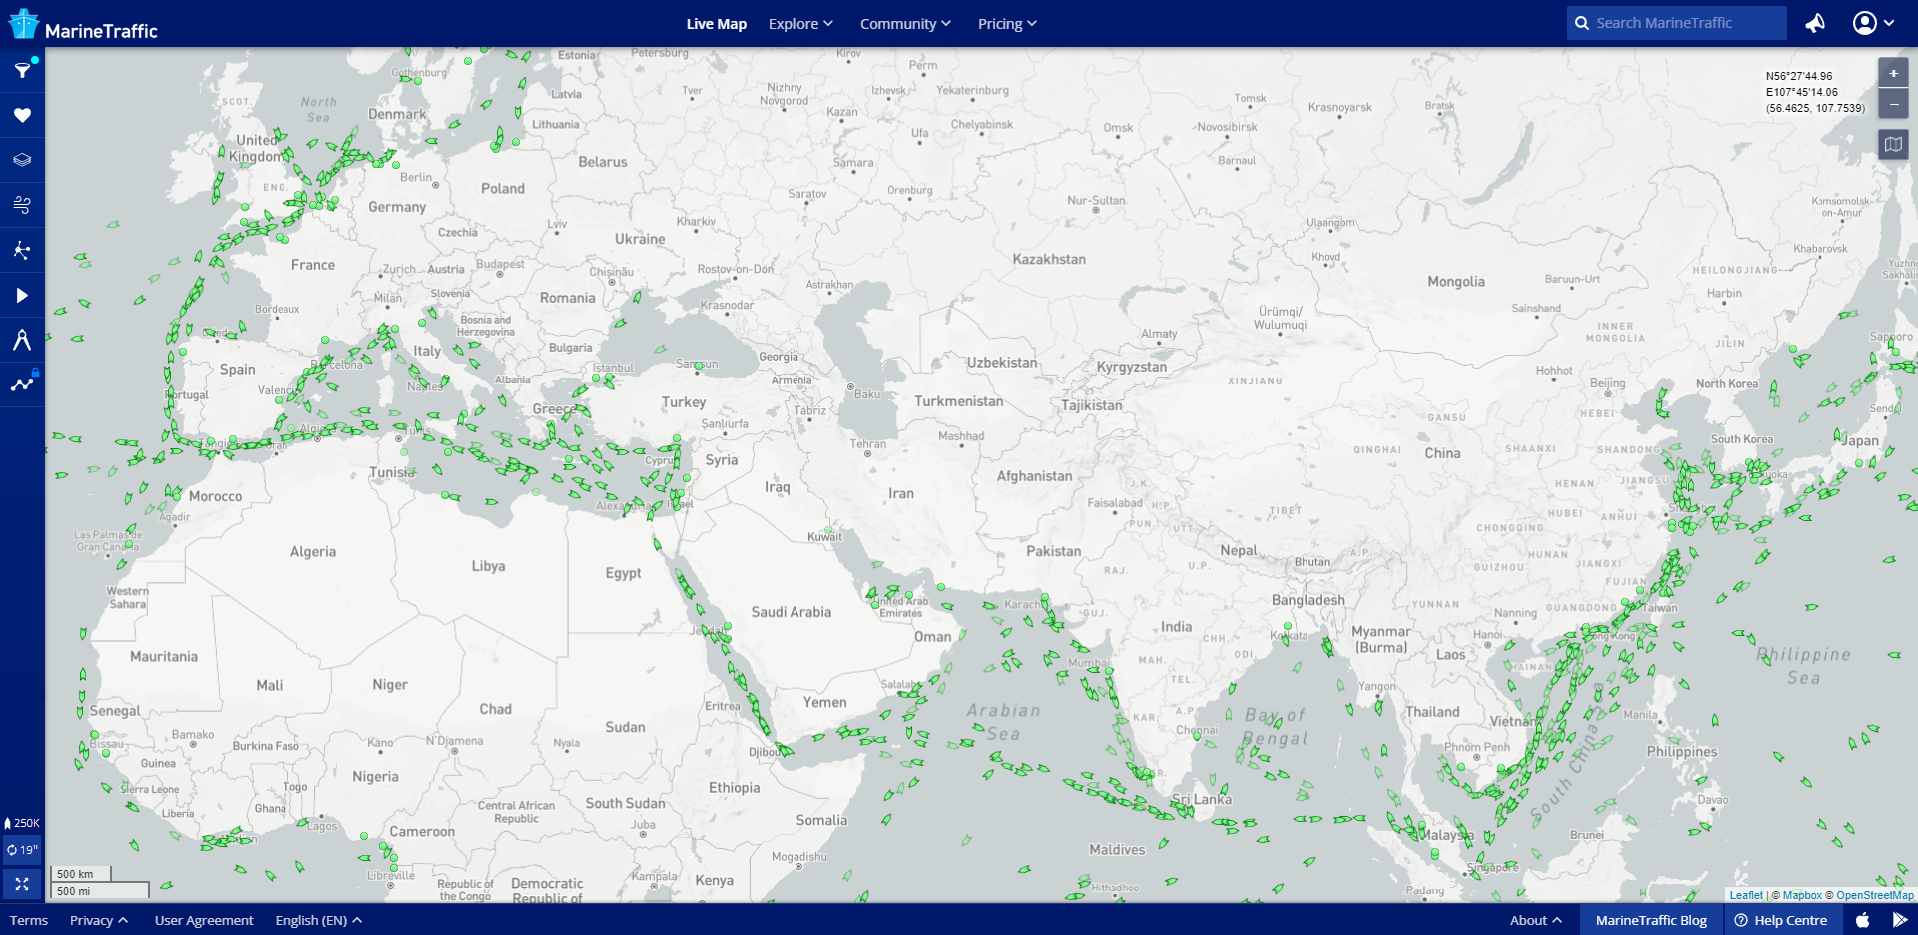 MarineTraffic Live Map - containerships